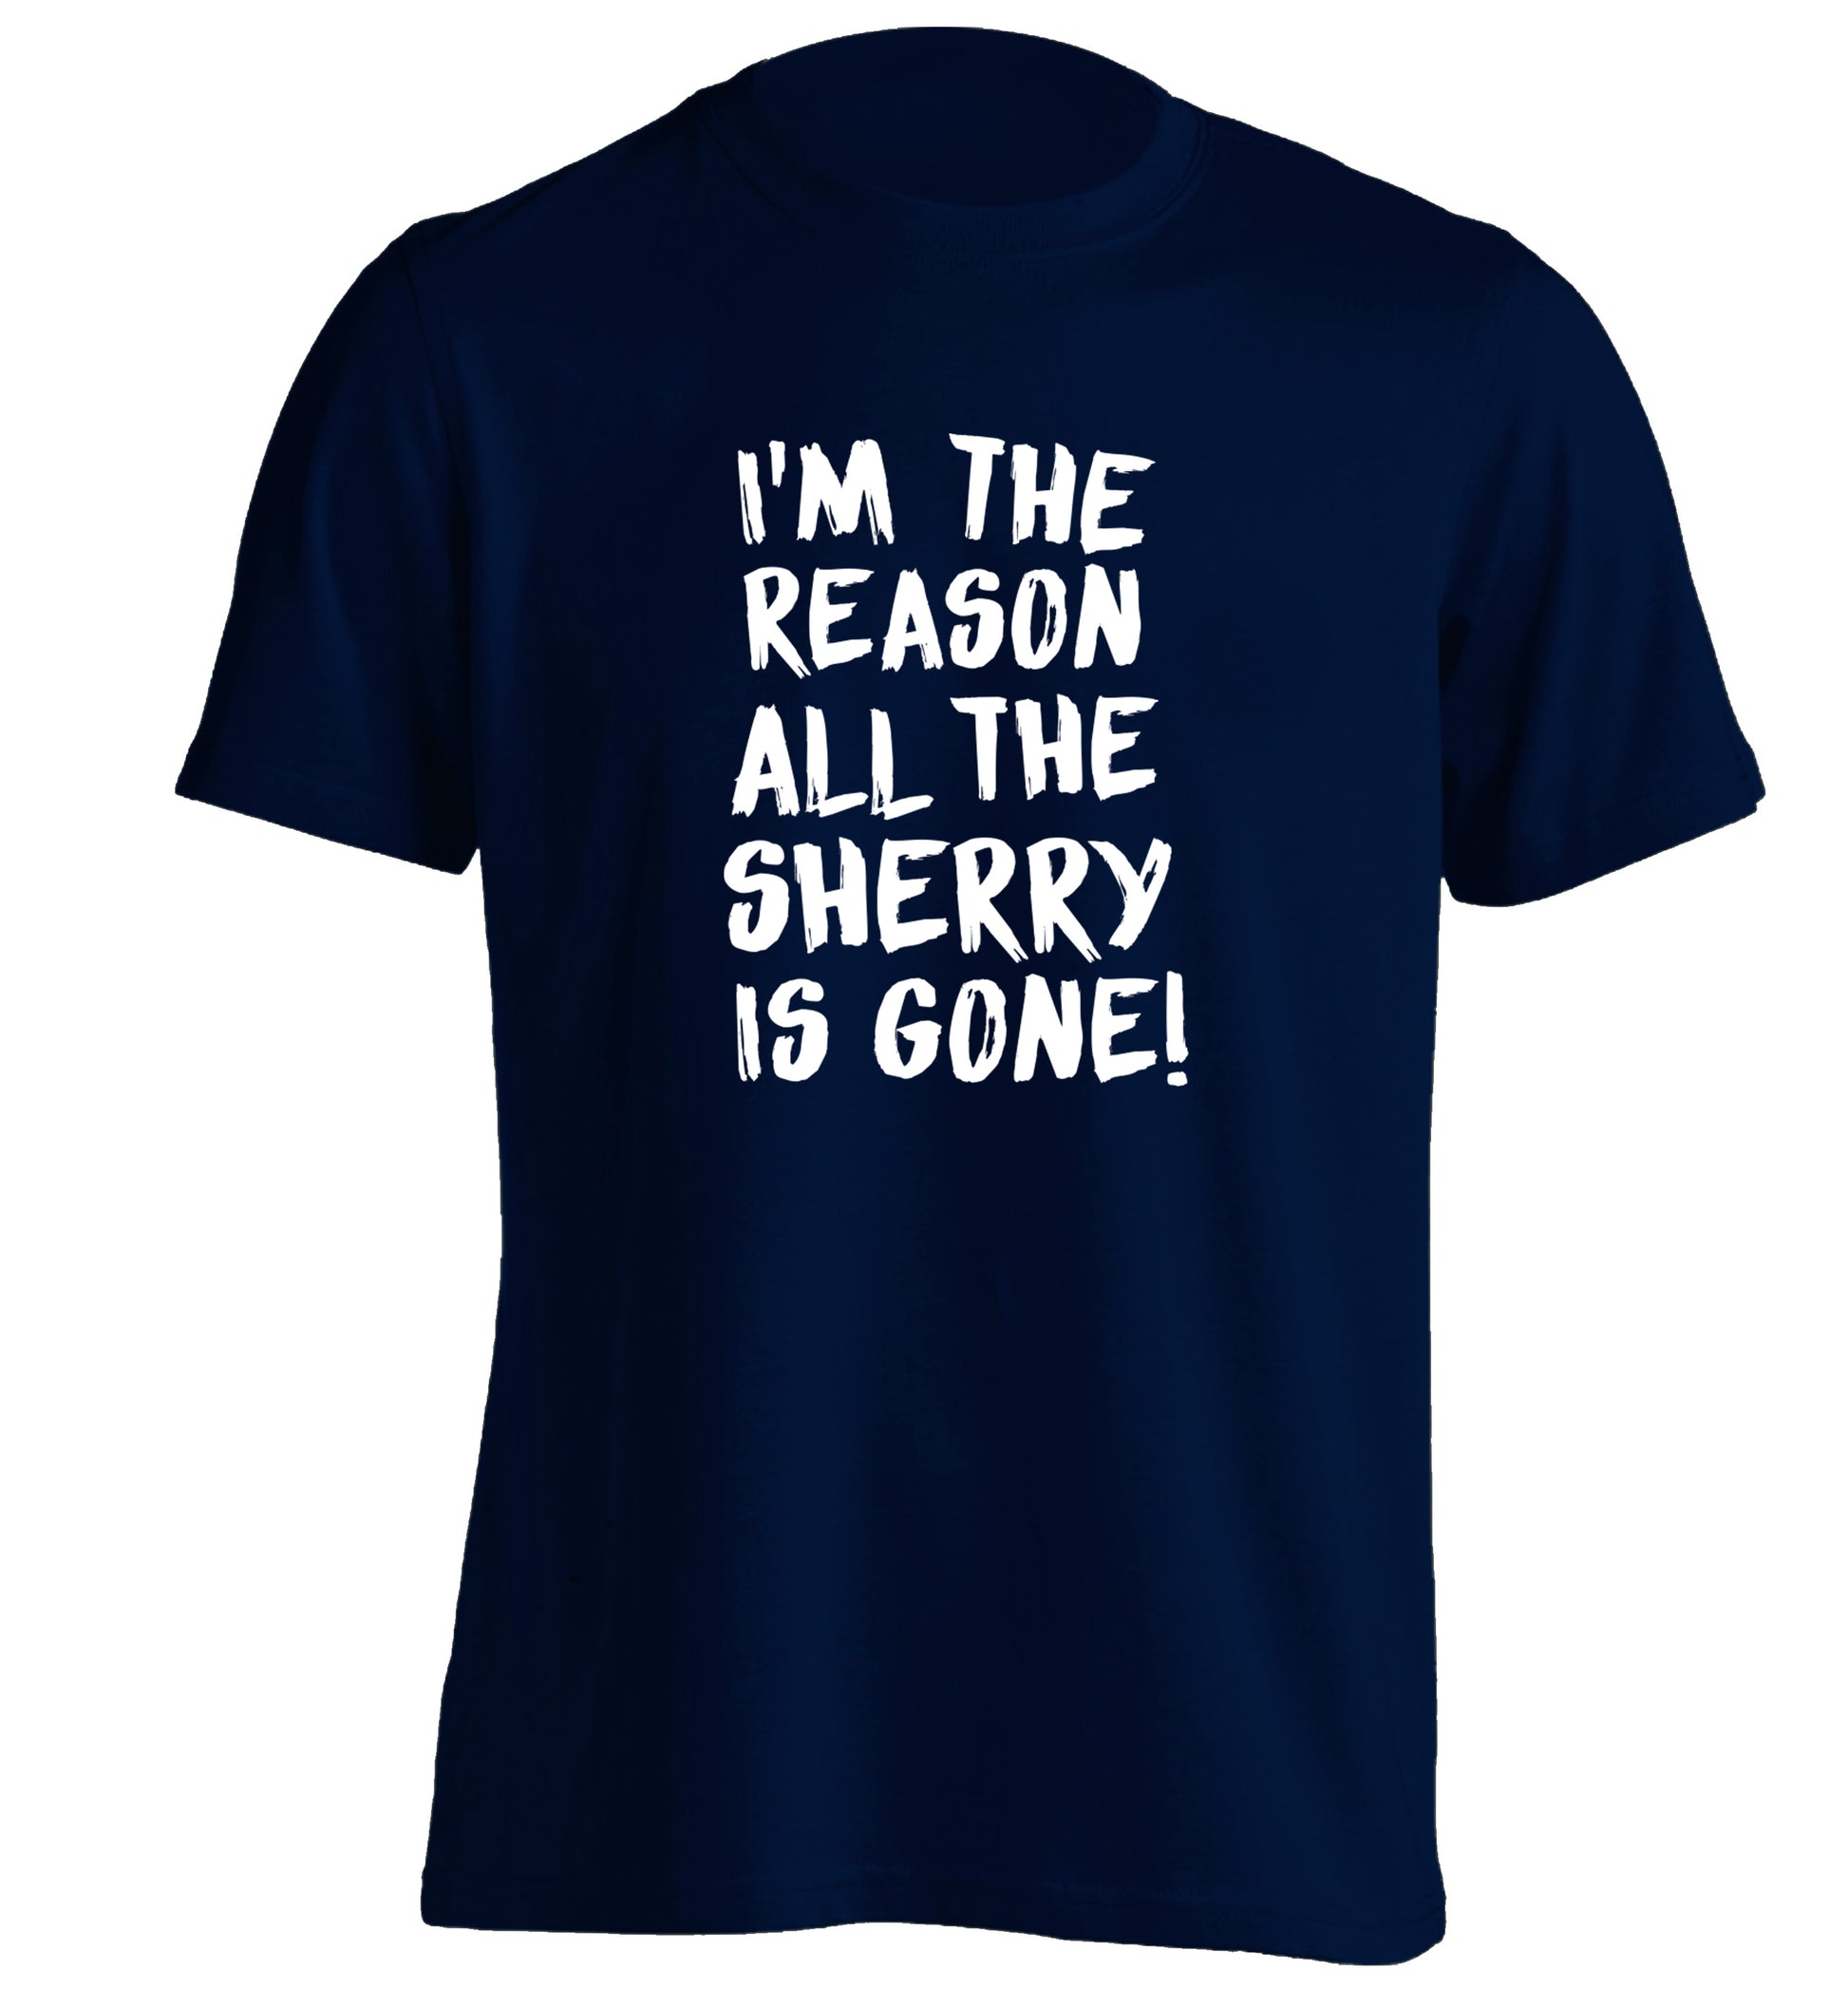 I'm the reason all the sherry is gone adults unisex navy Tshirt 2XL